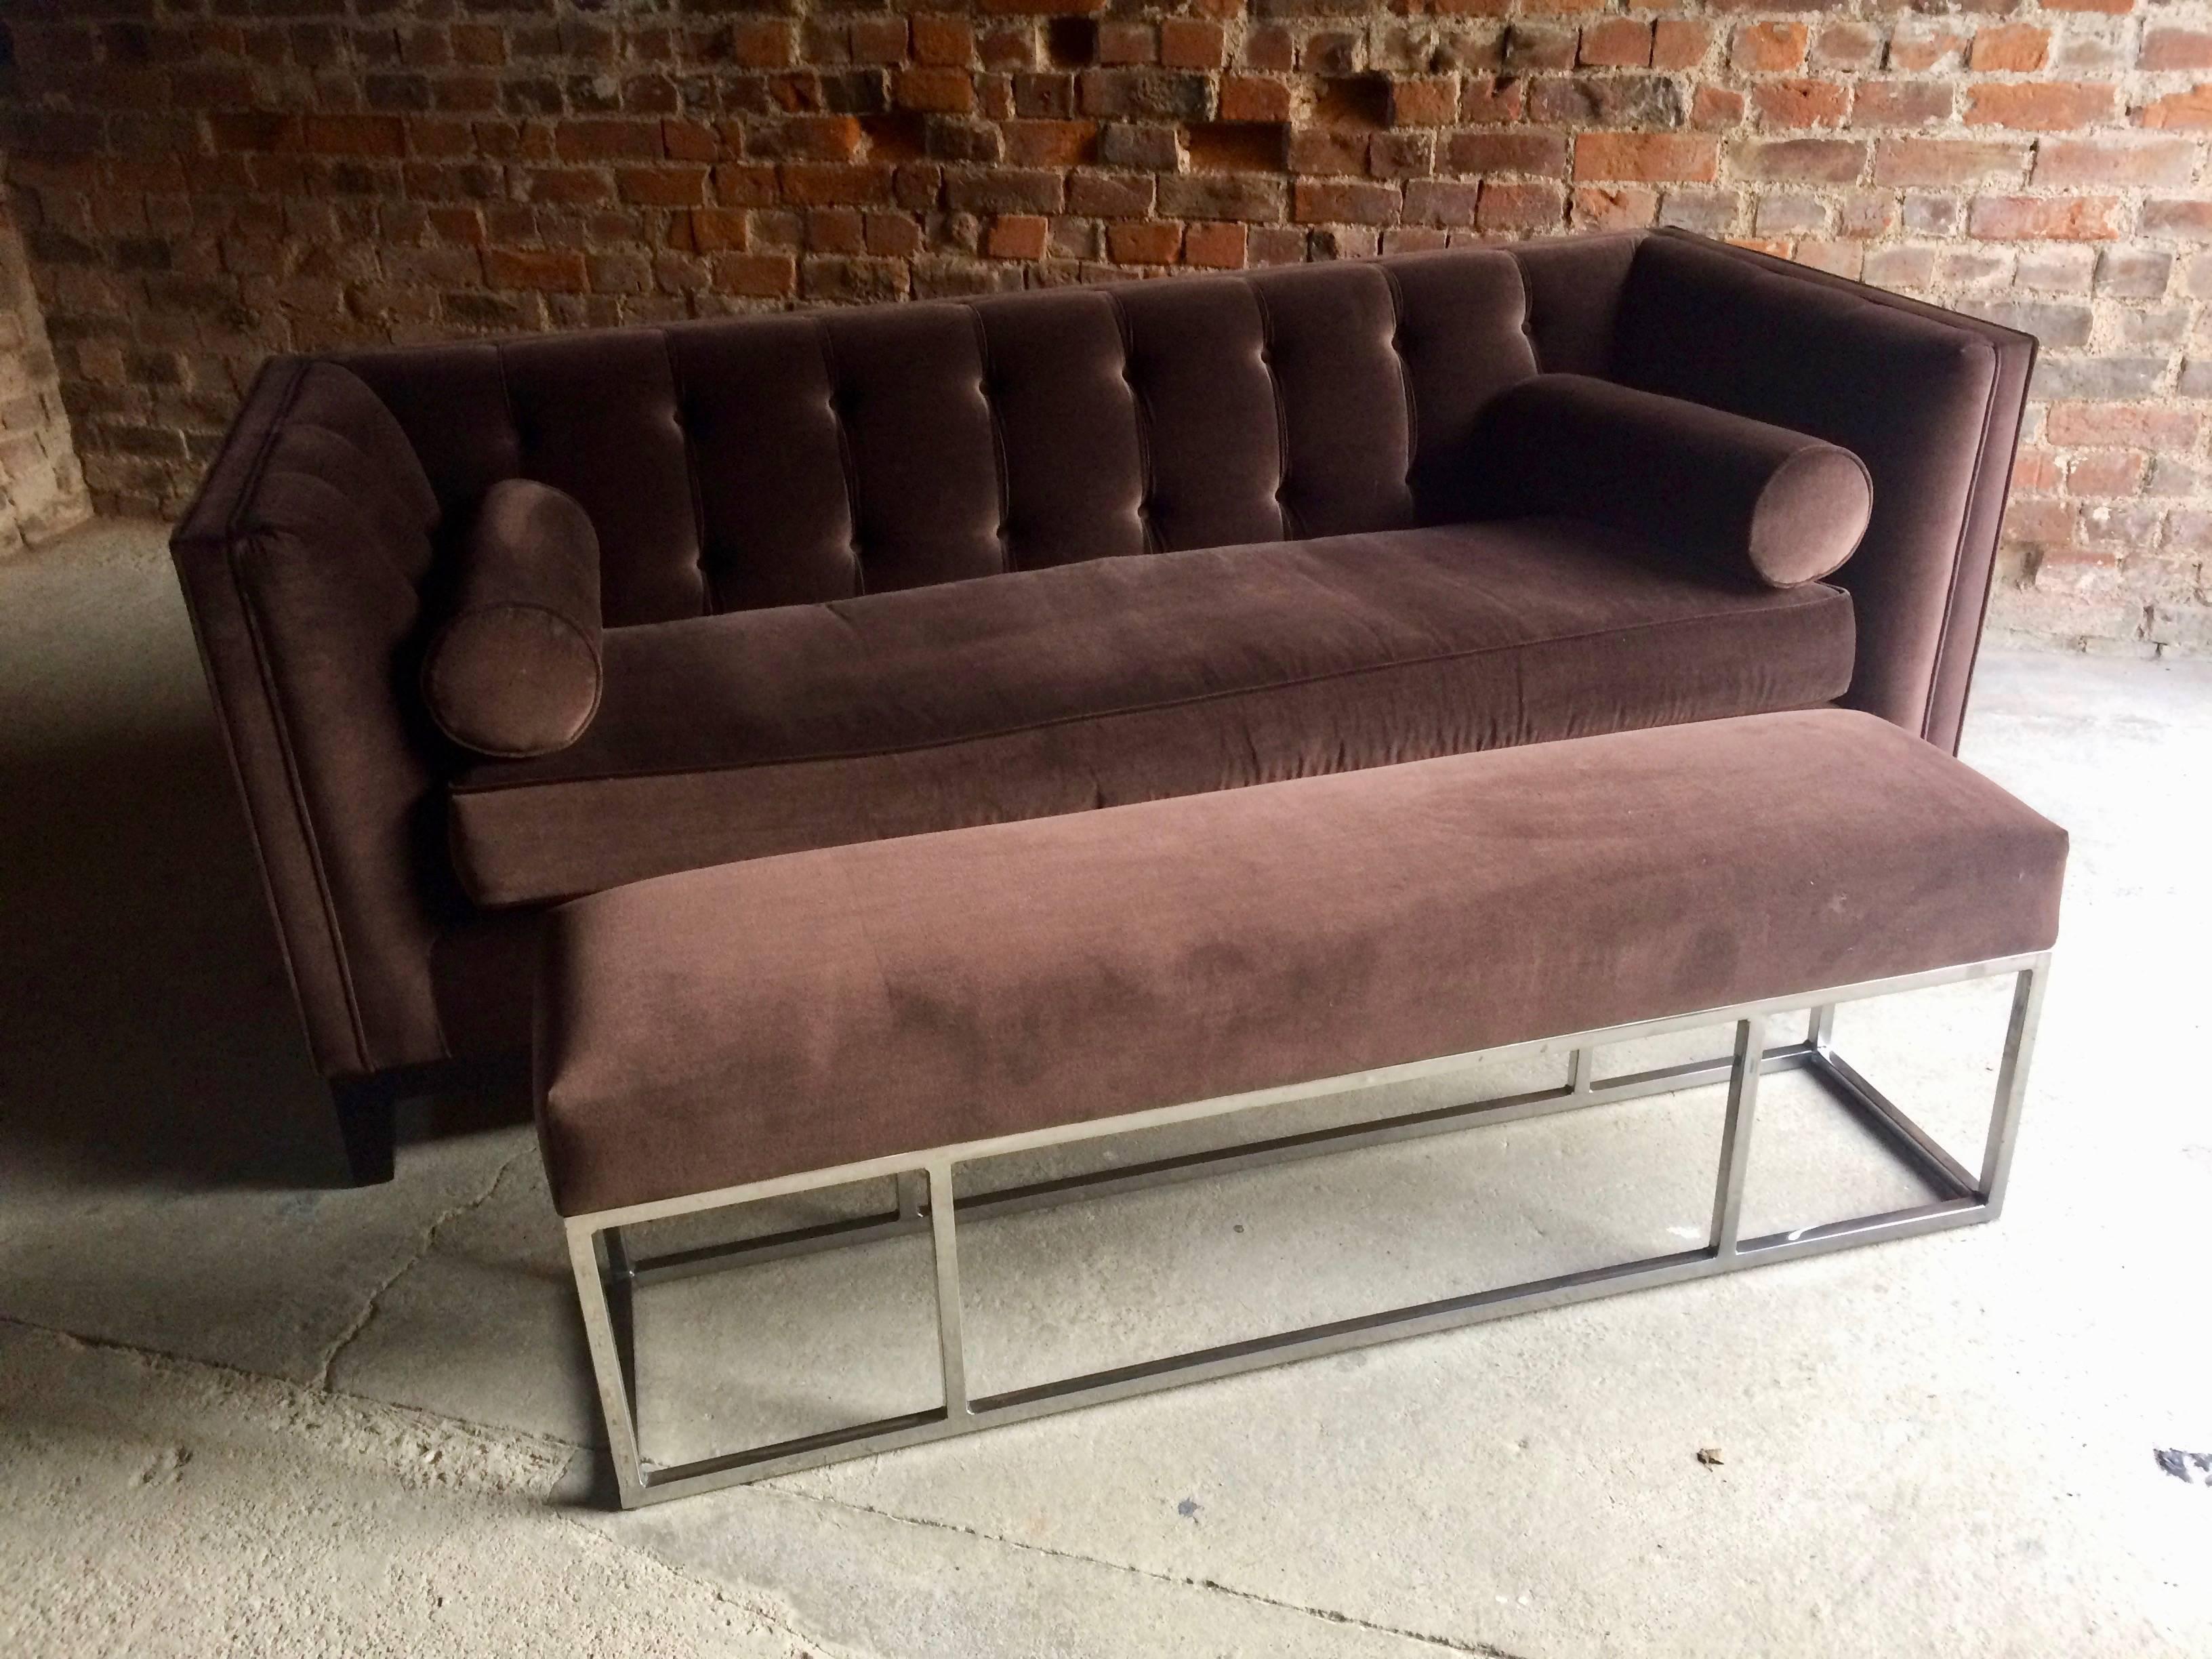 Bespoke Chesterfield Sofa with Matching Foot Stool Brown Velvet Sublime 4